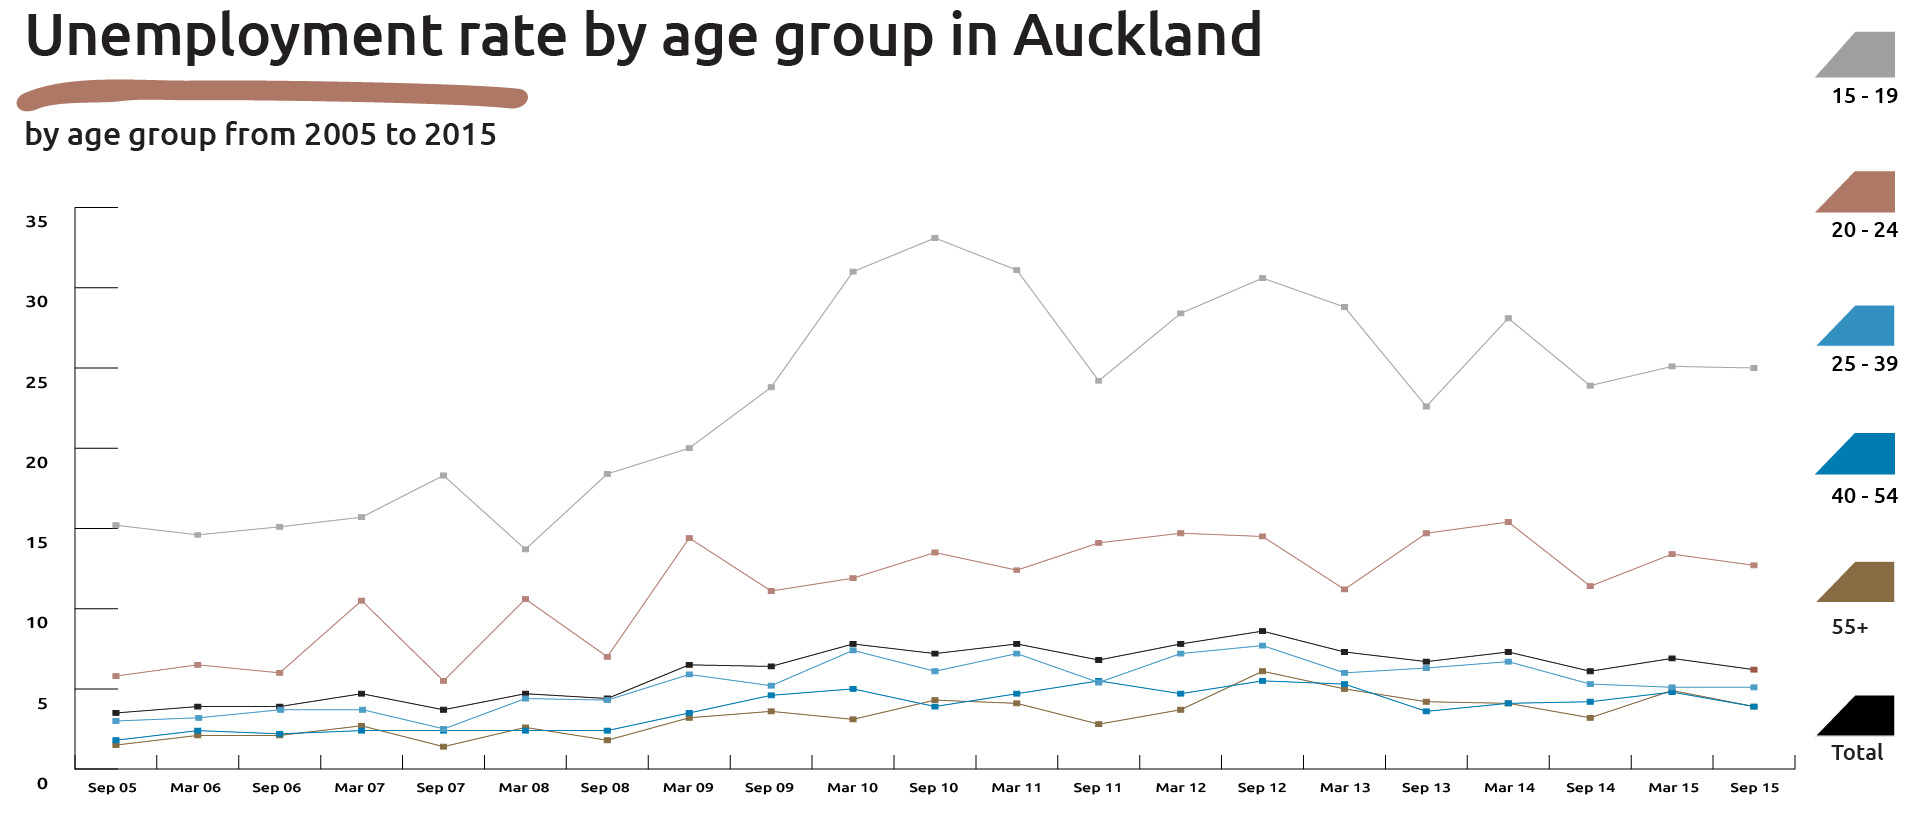 Graph showing the unemployment rate by age group in Auckland (September 2005 to 2015).